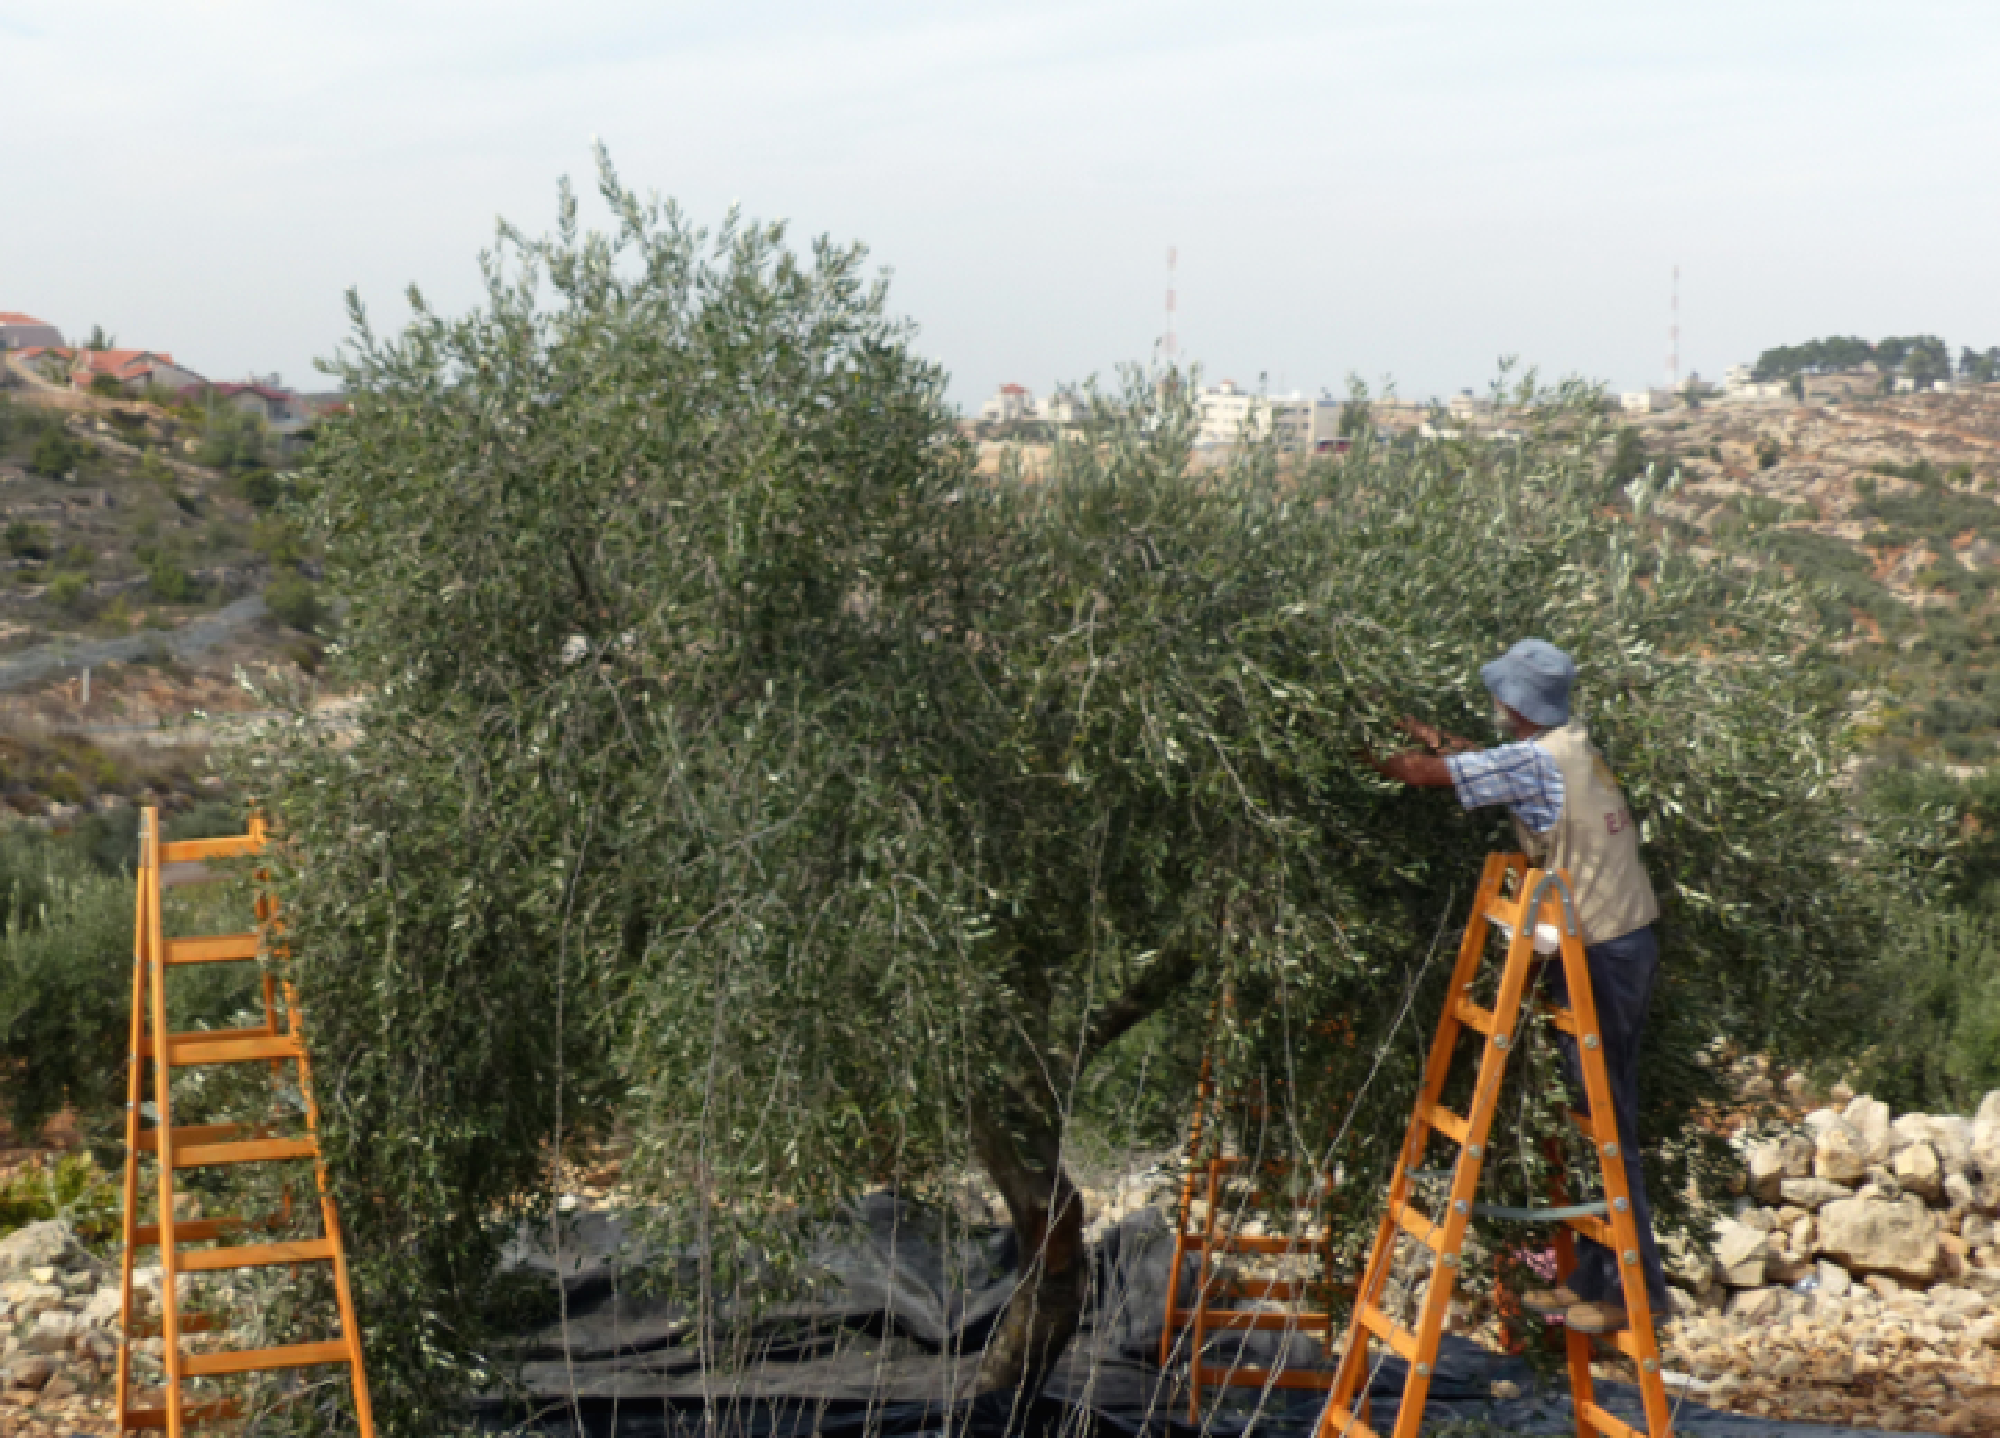 Olive picking event organized by the Humanitarian Country Team, Biddu village (Jerusalem), 23 October 2014. Photo by OCHA